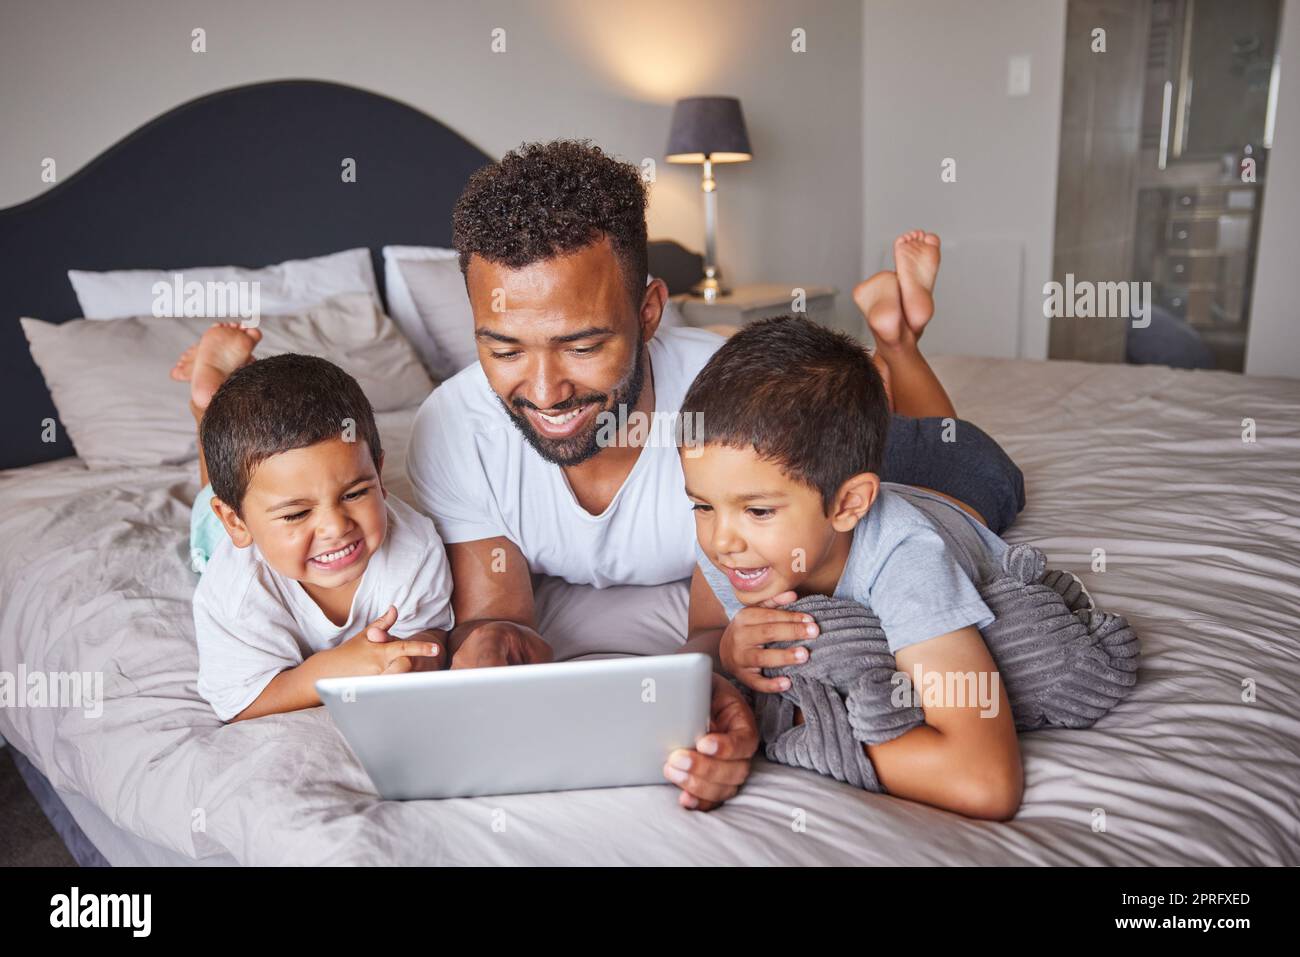 Technology, man and children relax on bed together to bond and have fun on the weekend with digital tablet. Happy father having quality time with his kids at family home for bonding relationship. Stock Photo